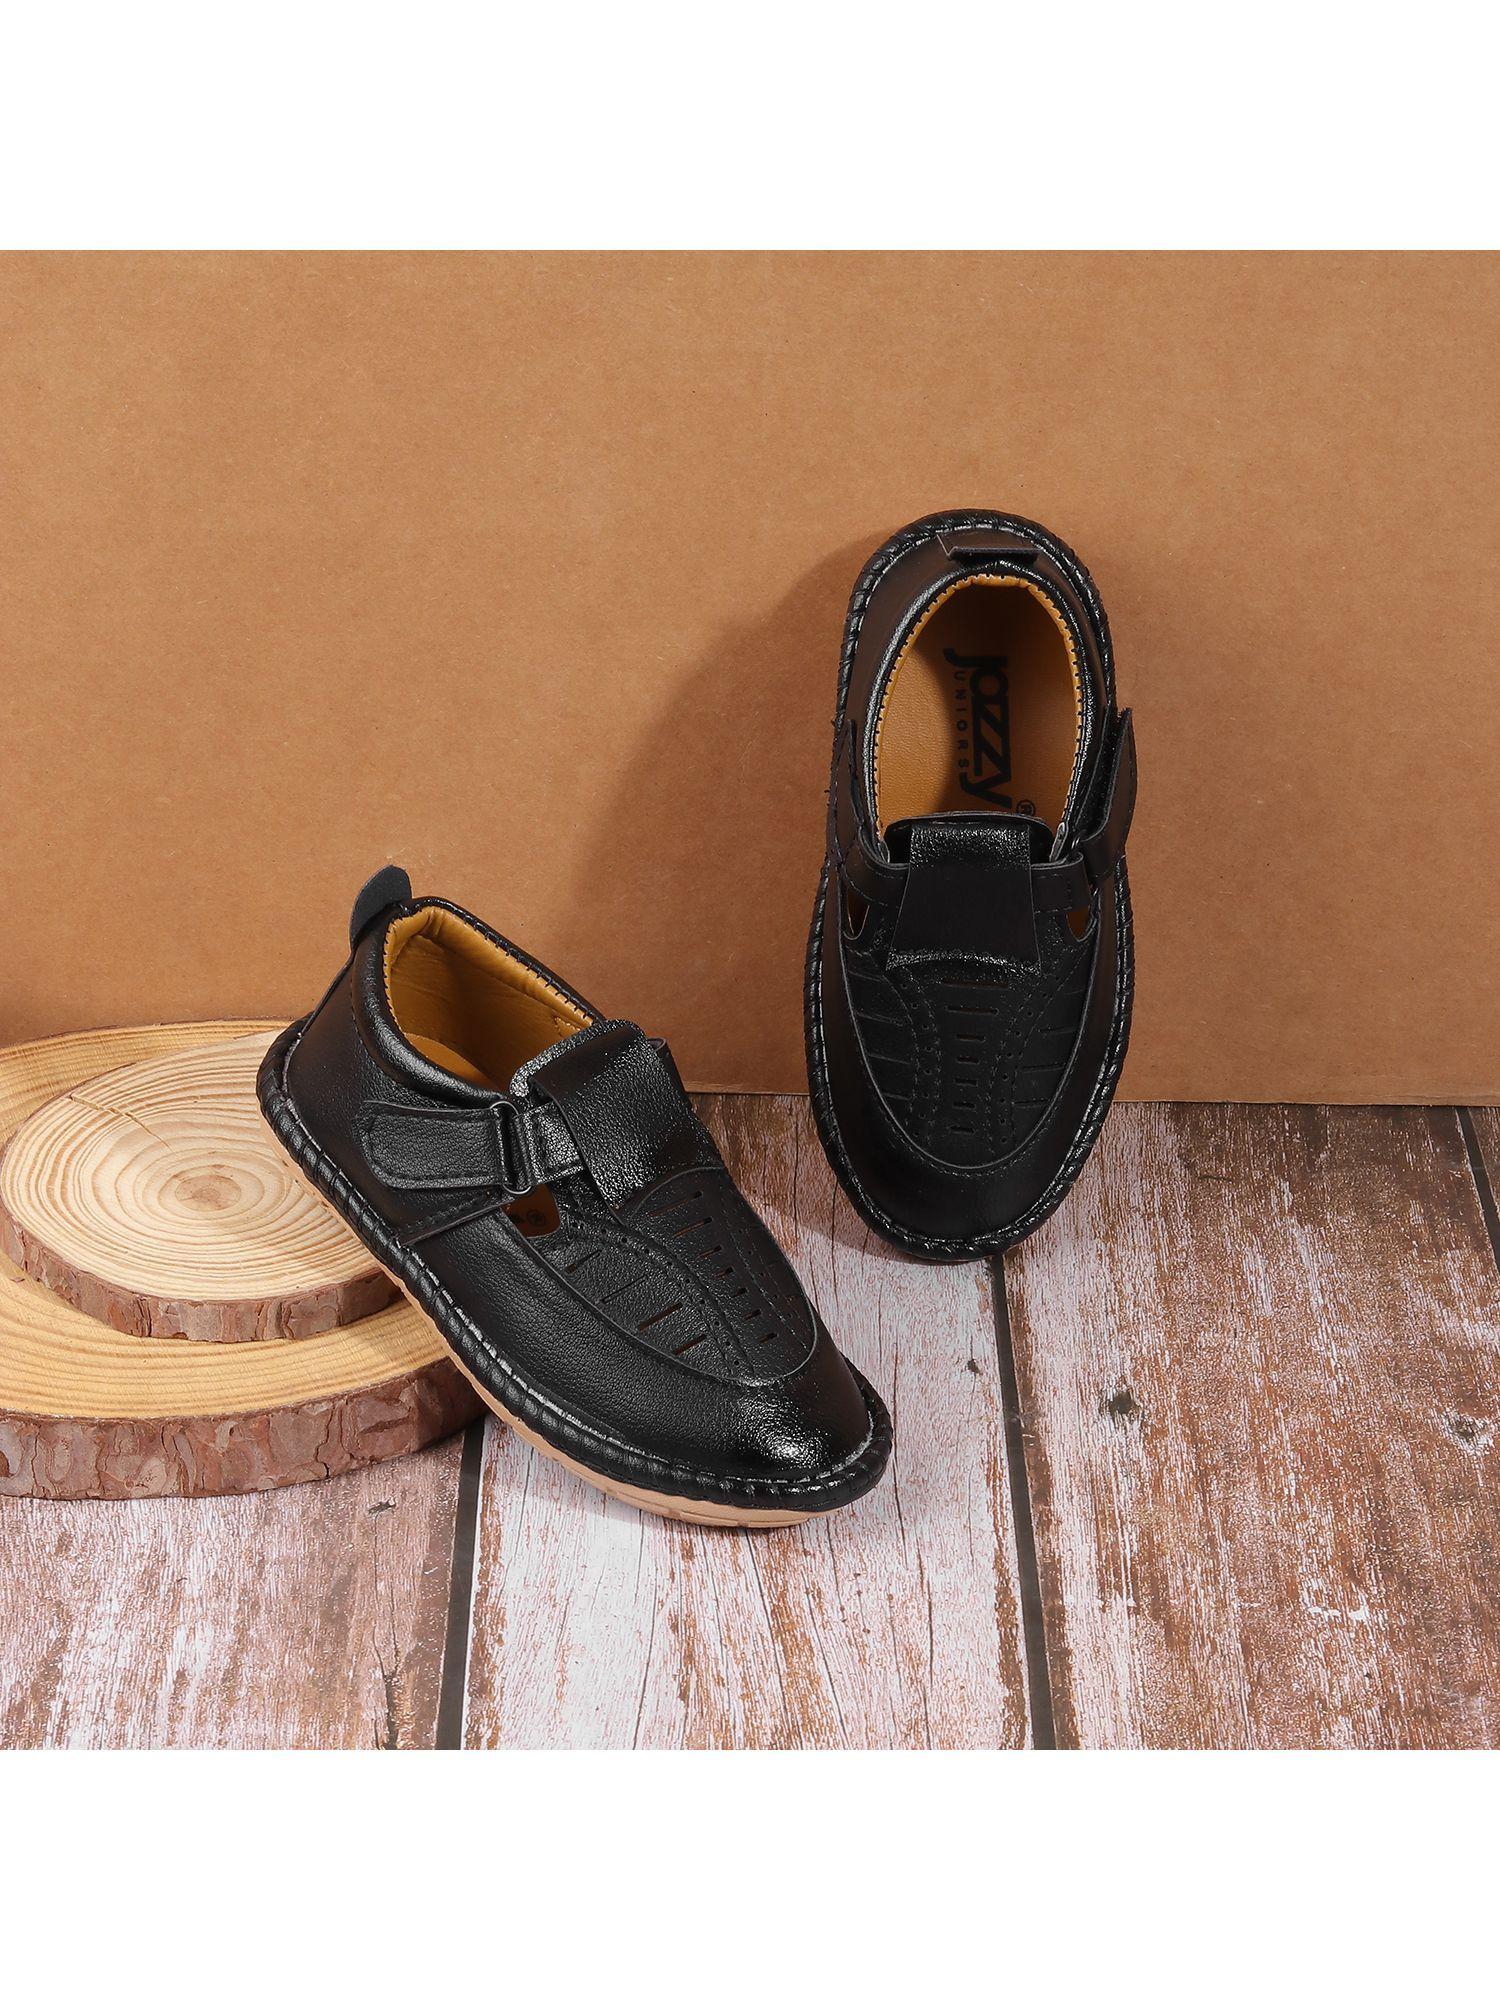 black-boys-casual-loafers-shoes